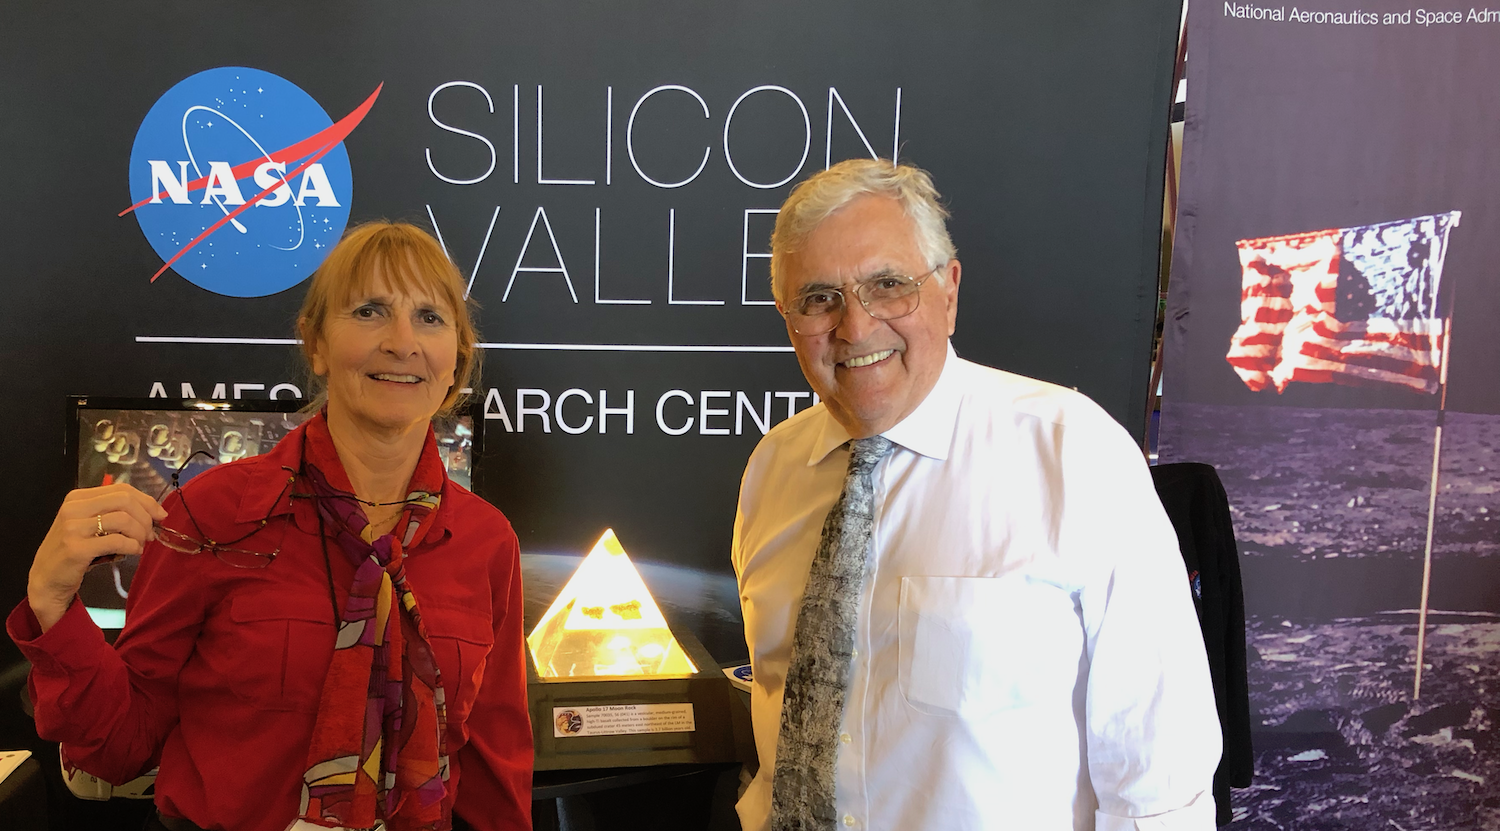 Carol with Apollo Astronaut Harrison (Jack) Schmidt at the Apollo 50th anniversary celebration. Between them in the pyramid is a